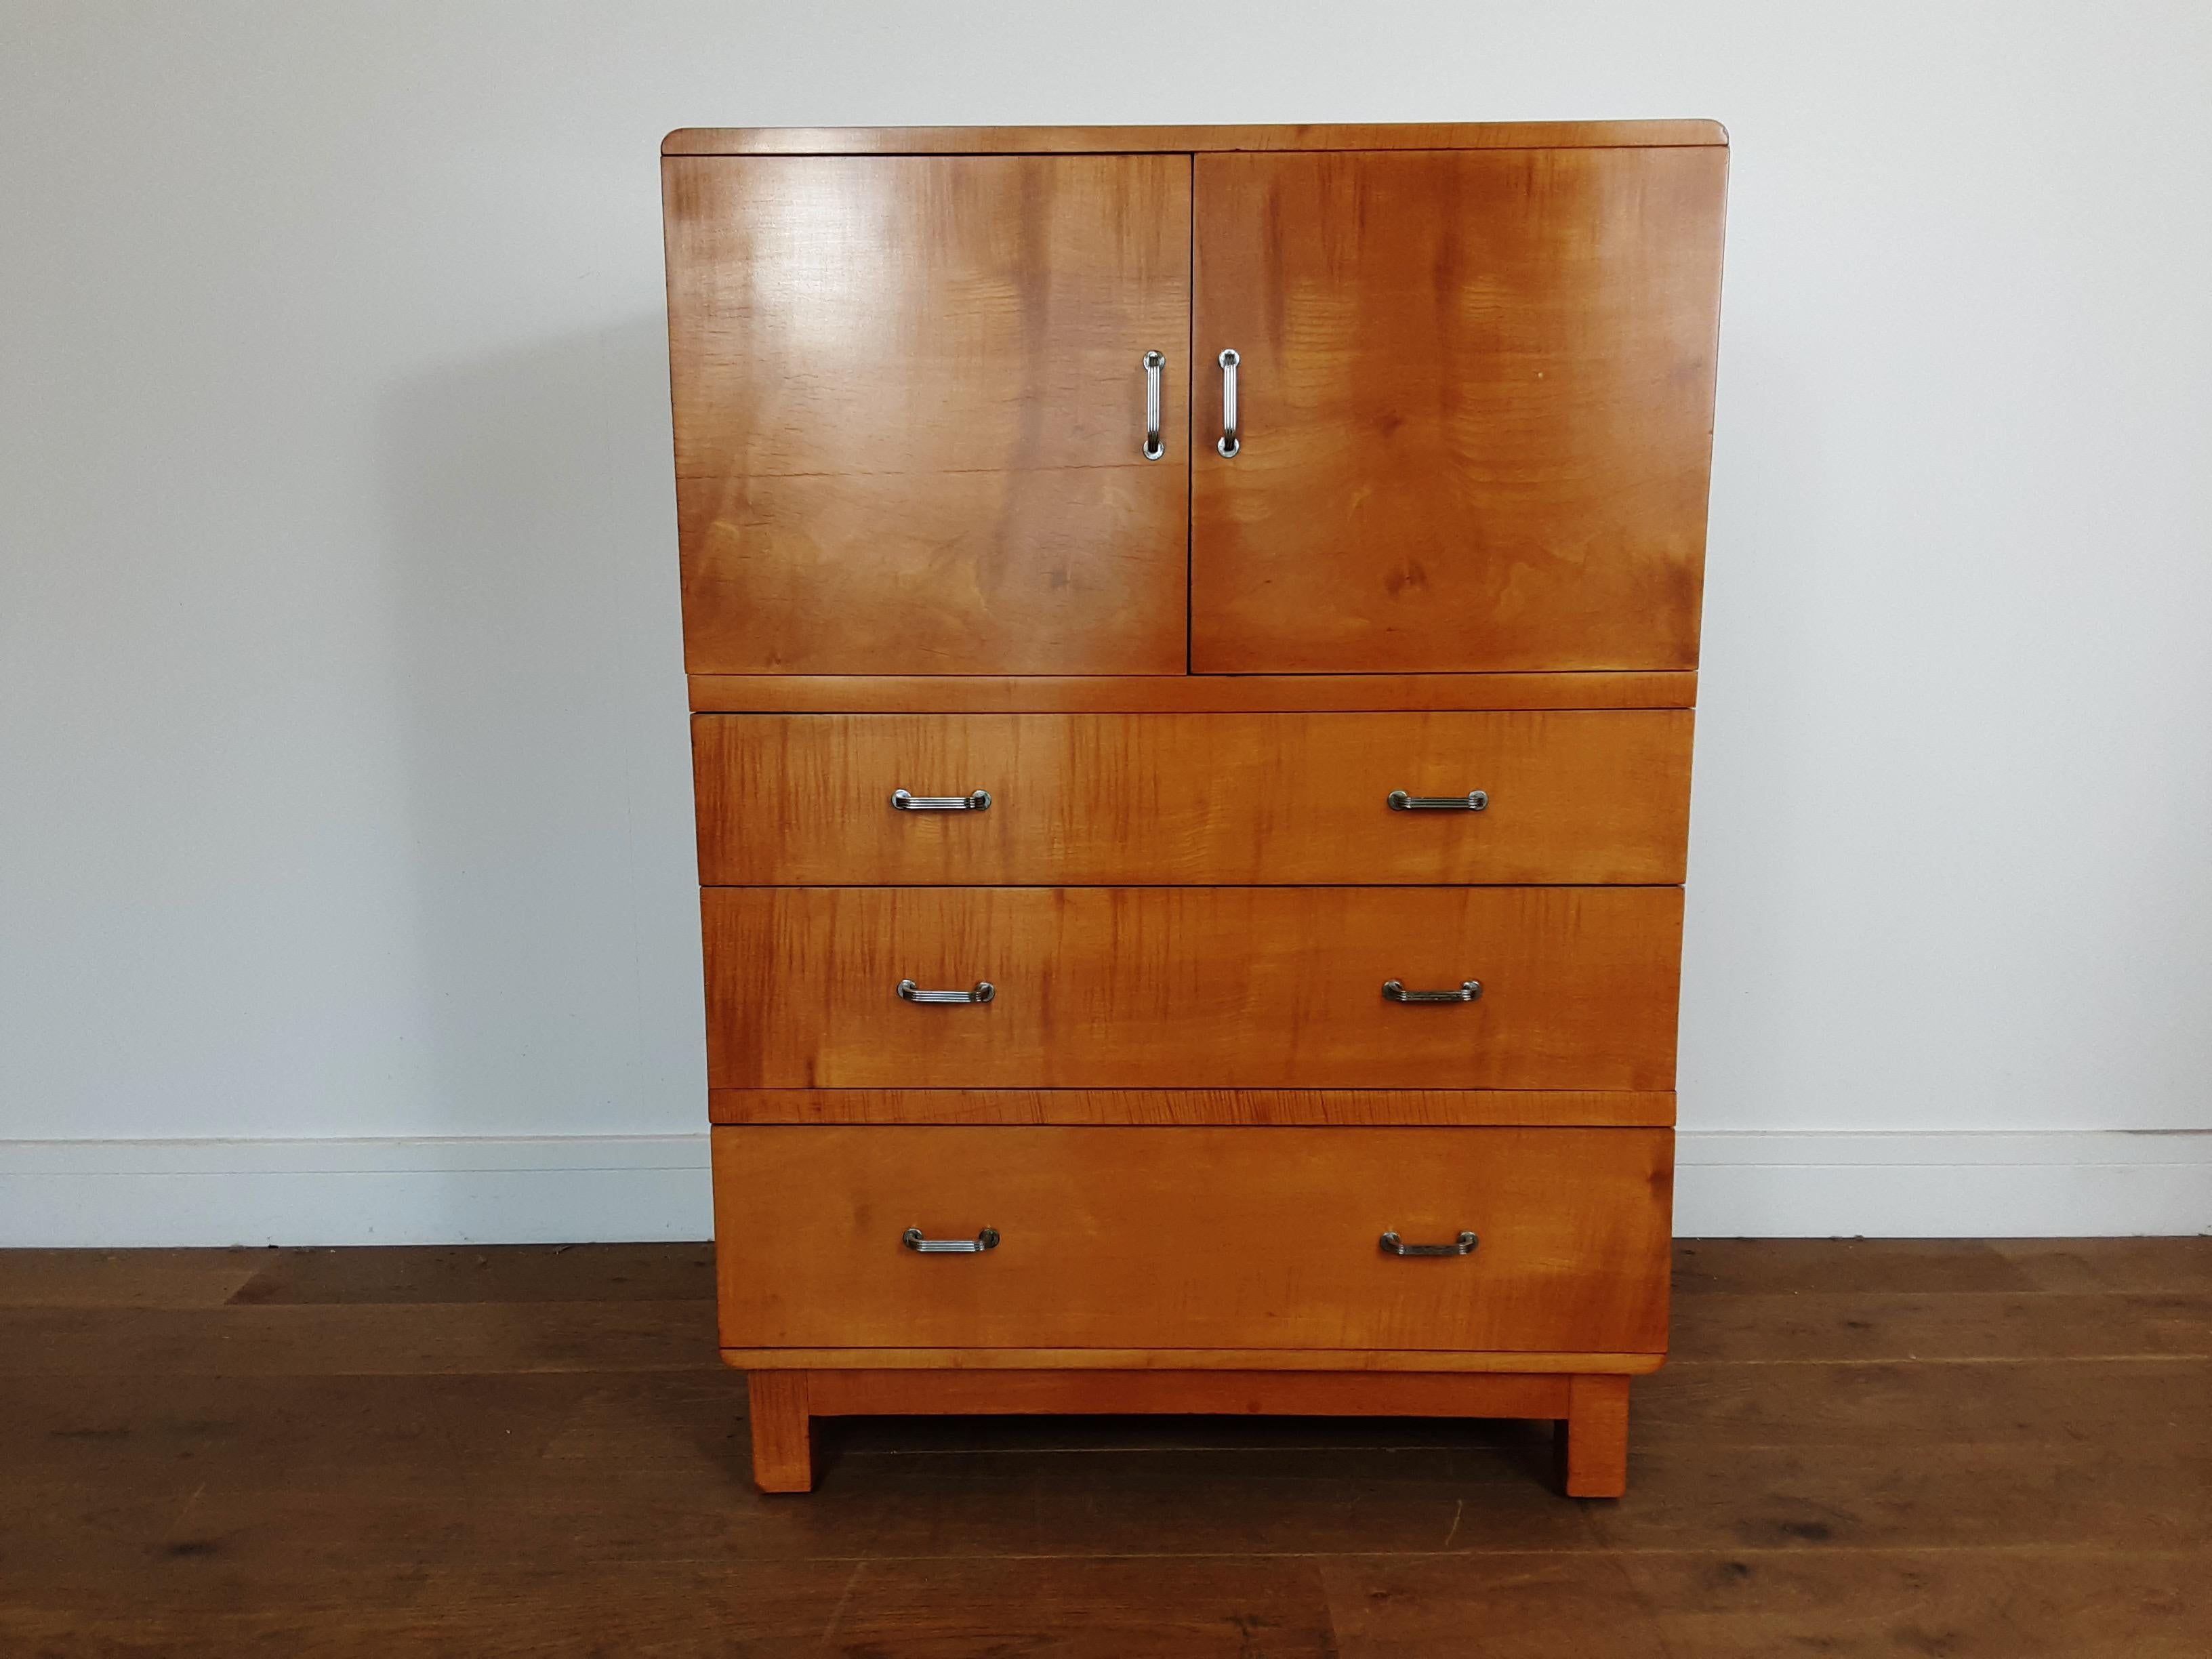 Art Deco 3 drawer linen press with single shelved two door cupboard.
Very pretty linen press in a blonde satin Birch finish.
Measures: 107 cm H, 76 cm W, 46 cm D
British, circa 1930.